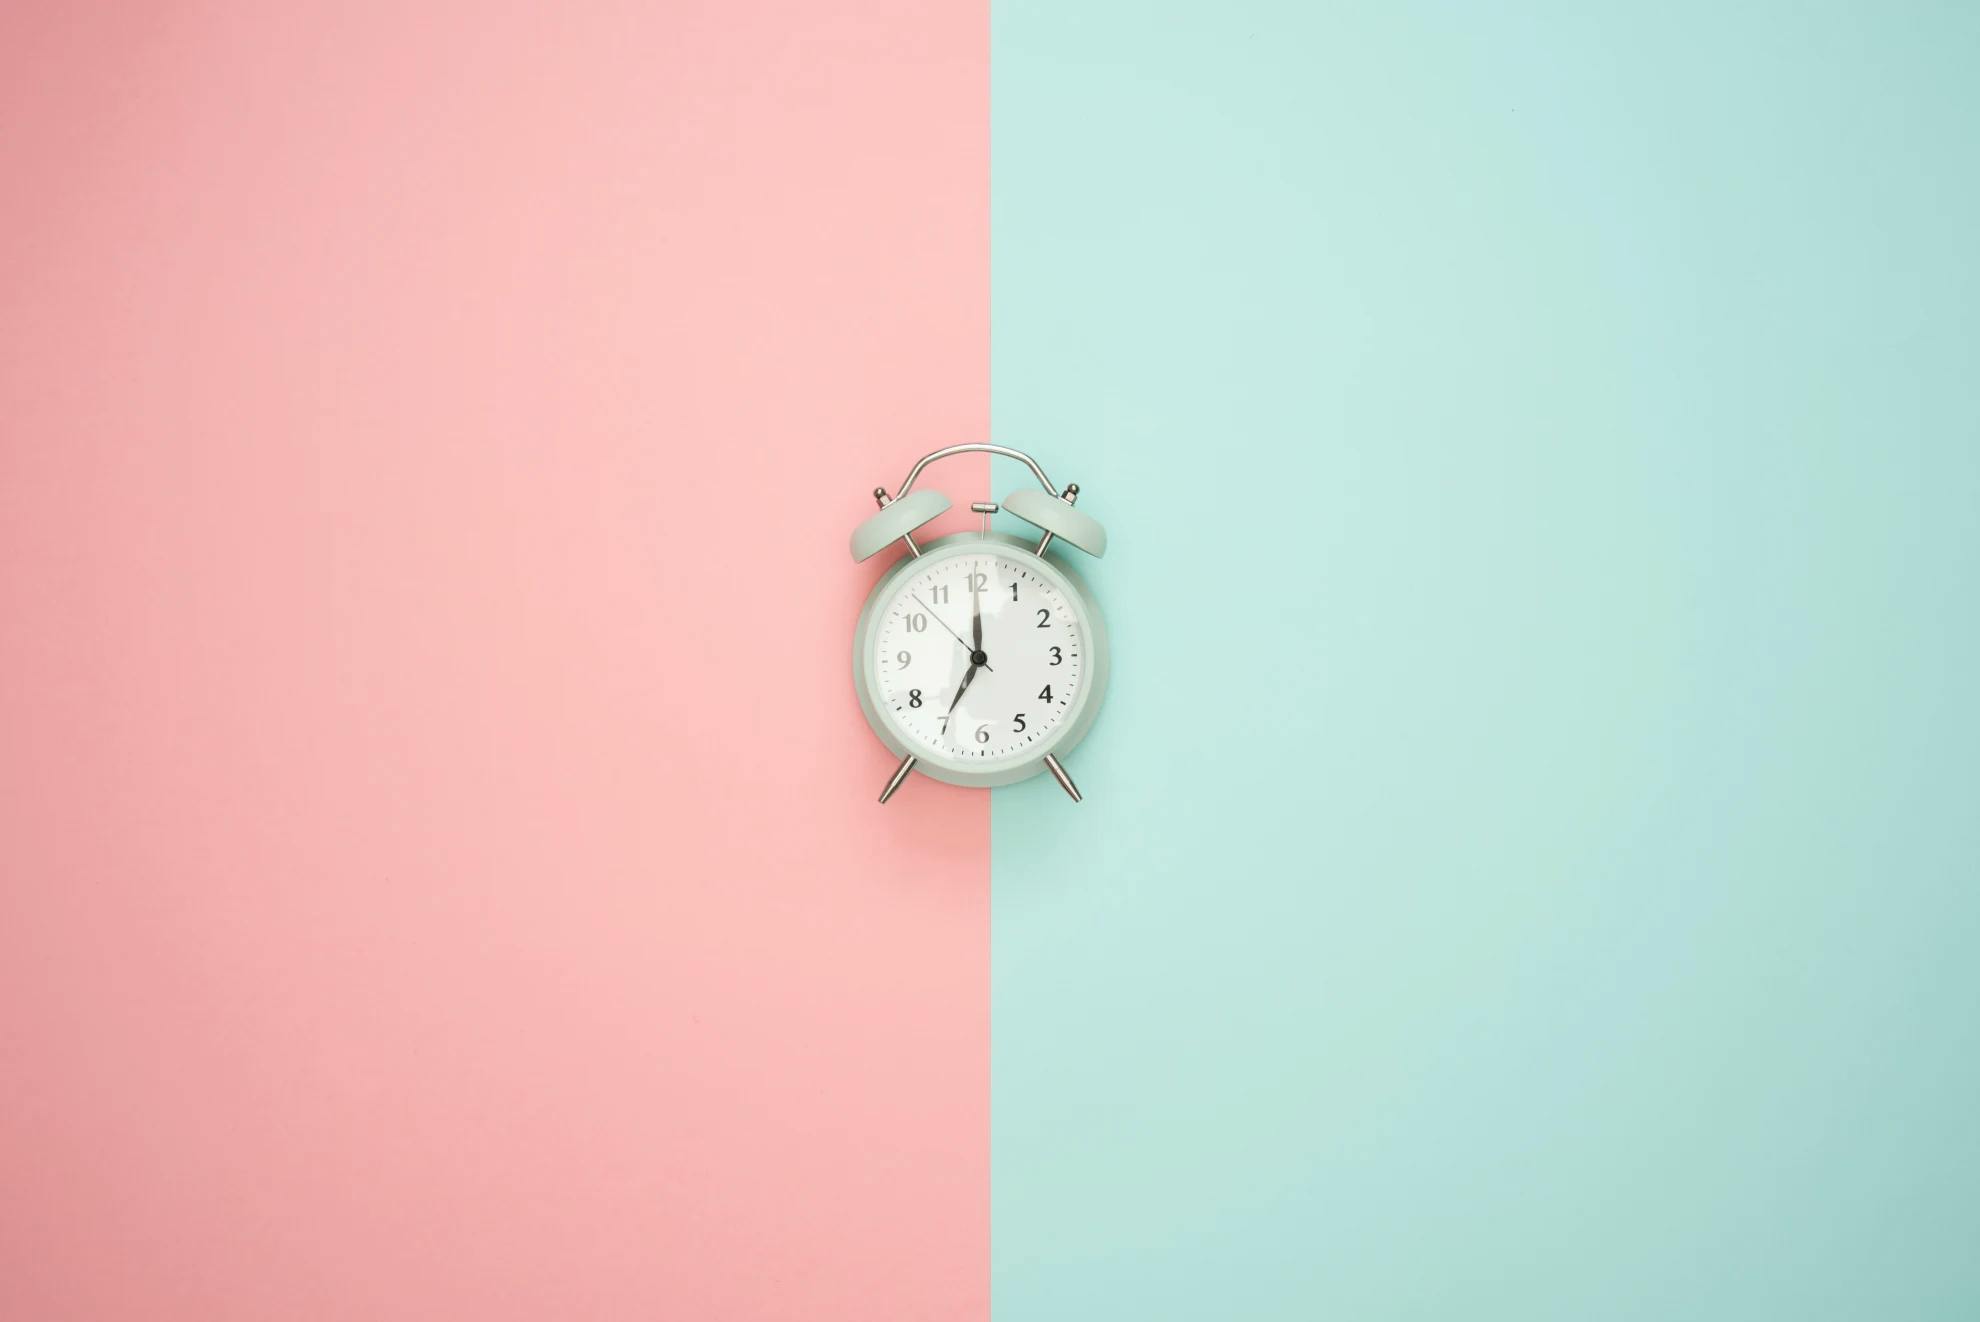 A white, old-school alarm clock in the middle of a dual-toned pink (left) and blue (right) image to signify what @thinkjrs could quickly find that visually represented the program 'cron'.